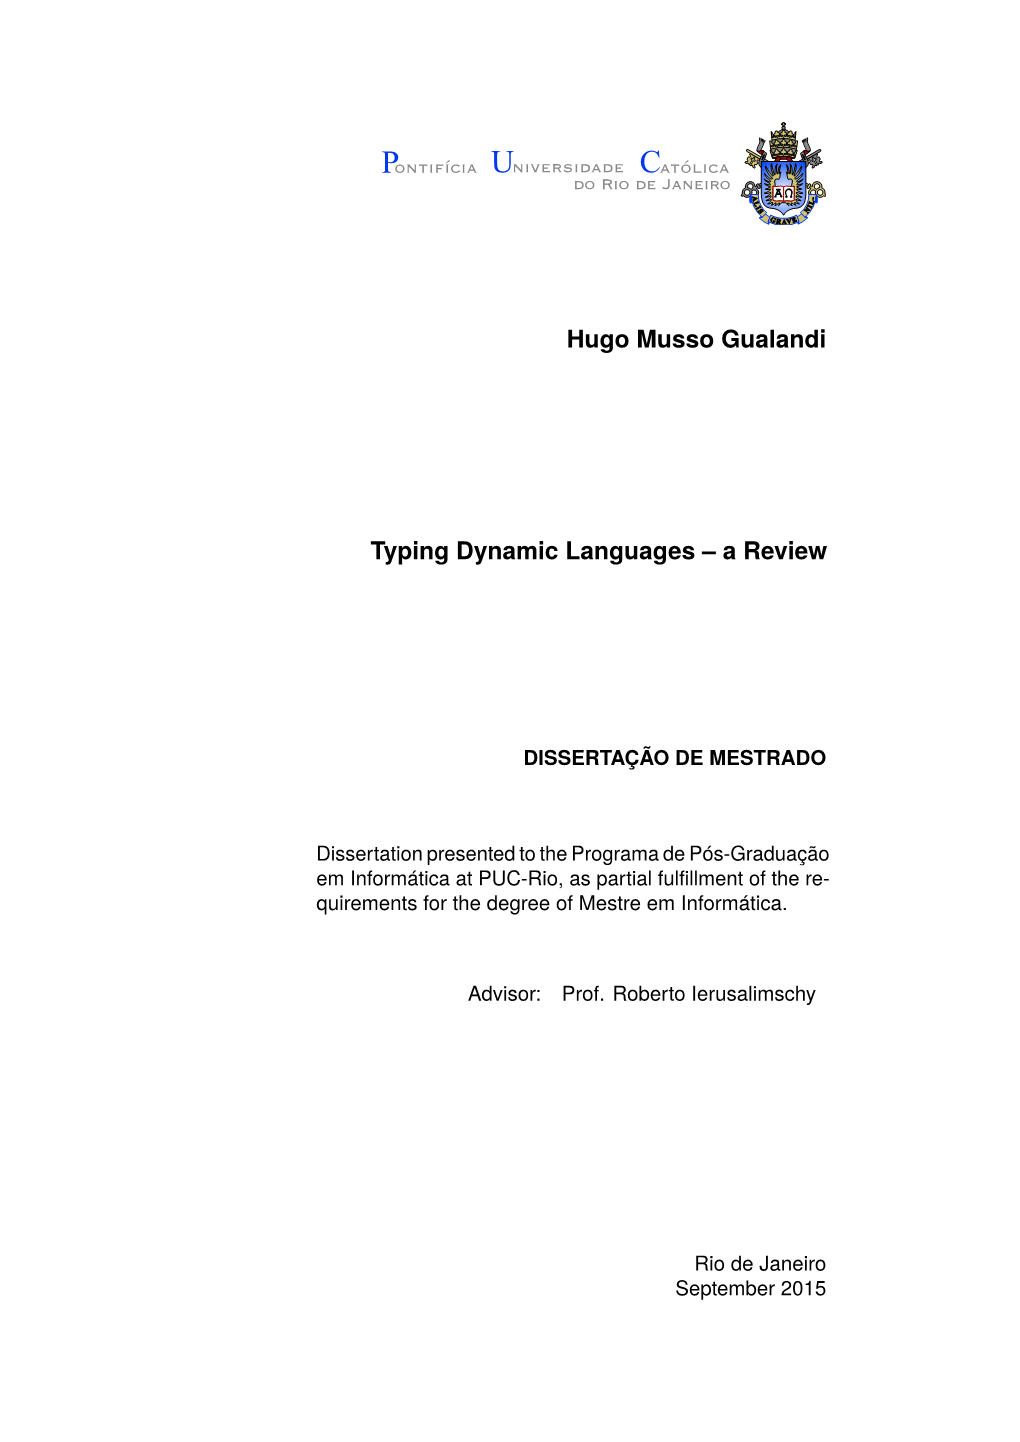 Typing Dynamic Languages – a Review